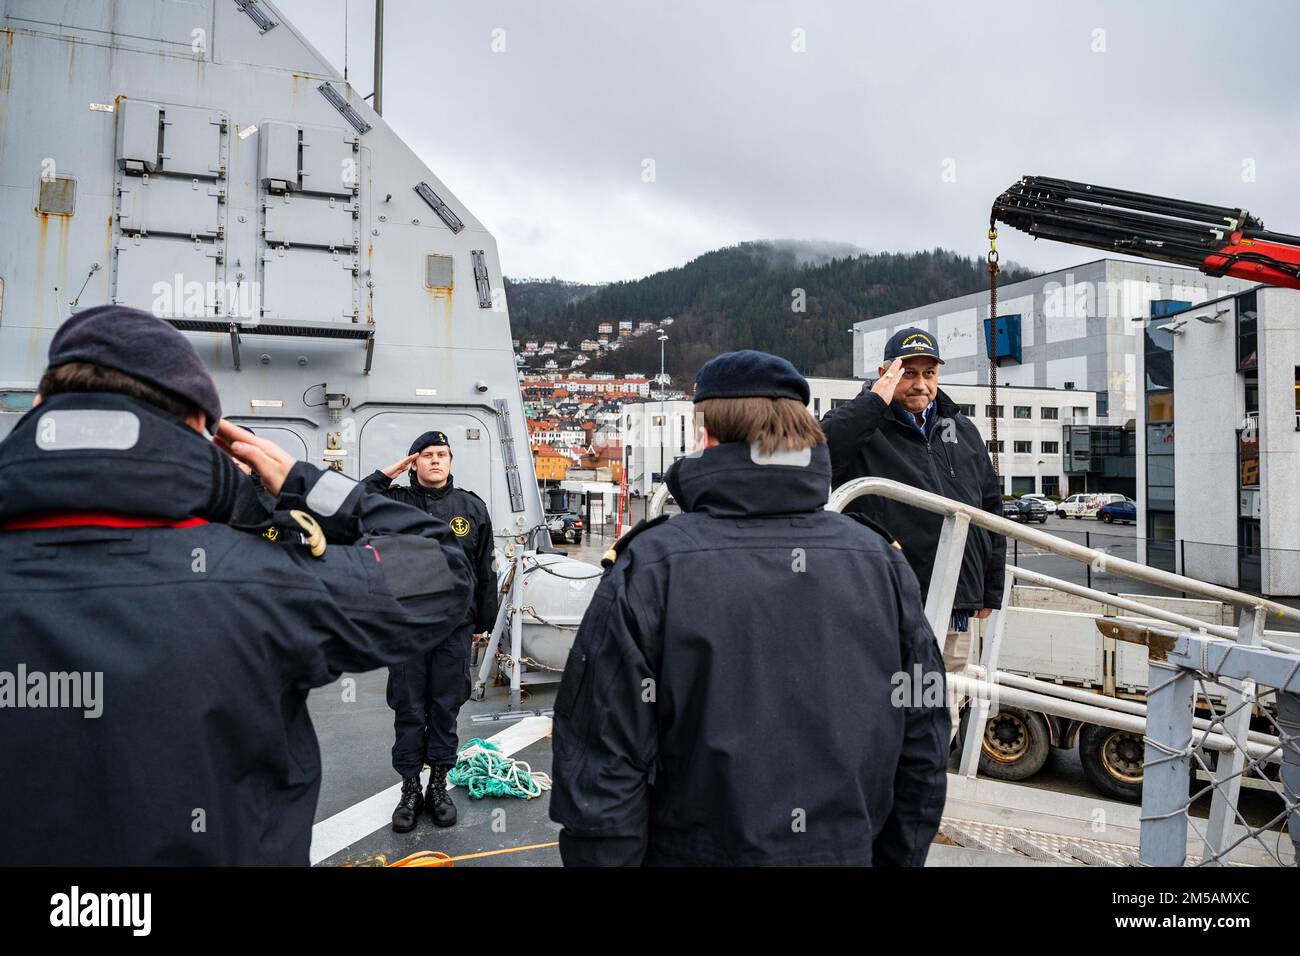 BERGEN, Norway (Feb. 16, 2022) — Secretary of the Navy Carlos Del Toro renders honors to the Norwegian flag and crew of HNoMS Thor Heyerdahl (F314), in Bergen, Norway, Feb. 16, 2022. Secretary Del Toro is in Norway to visit U.S. service members and Norwegian government leaders to reinforce existing bilateral and multilateral security relationships between the U.S. Navy and the Royal Norwegian Navy. Stock Photo